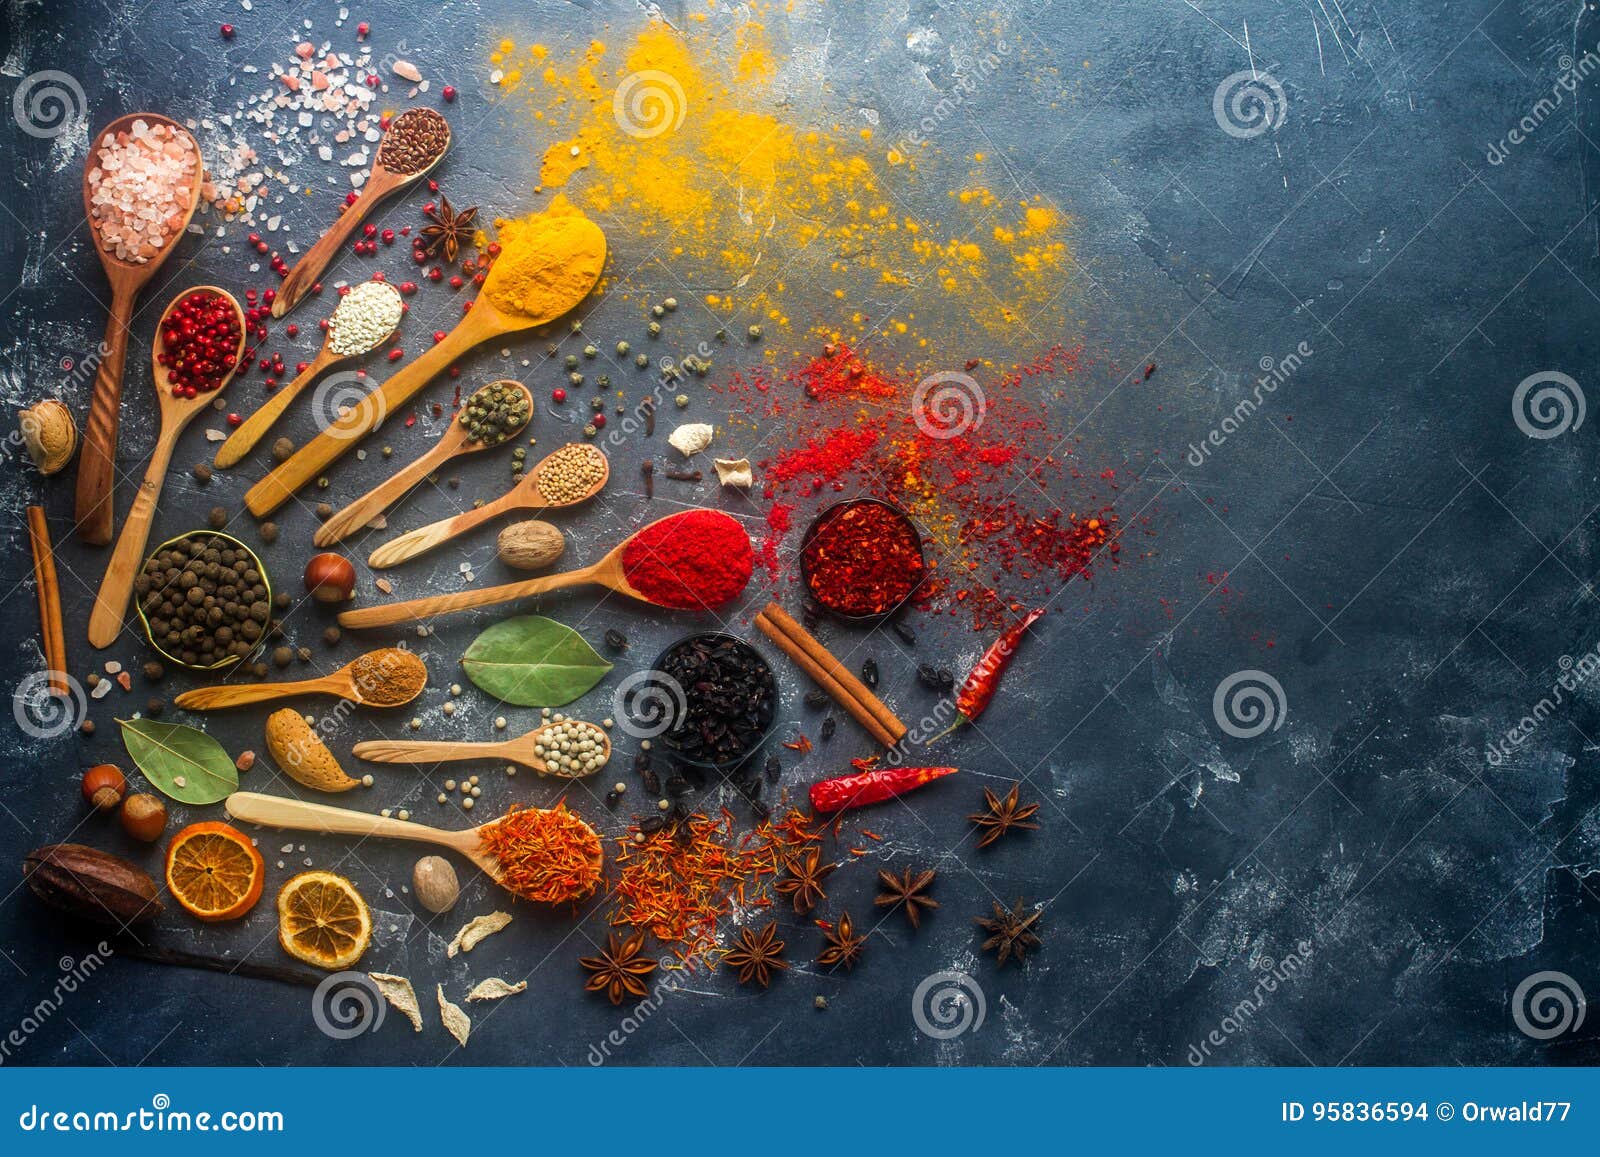 https://thumbs.dreamstime.com/z/indian-spices-herbs-nuts-wooden-silver-spoons-metal-bowls-space-text-various-seeds-dark-stone-table-colorful-top-95836594.jpg